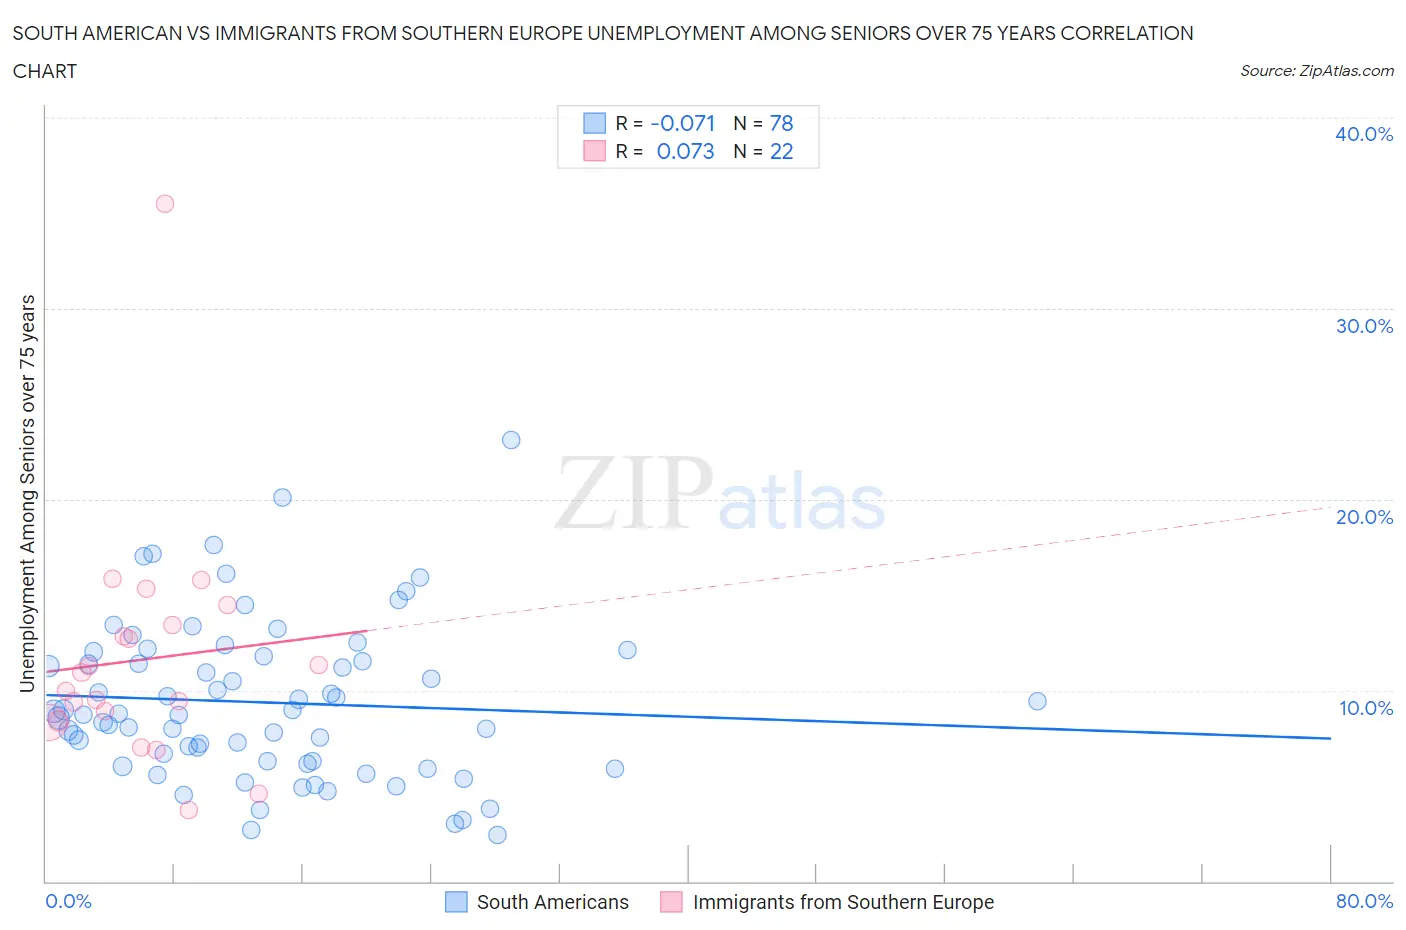 South American vs Immigrants from Southern Europe Unemployment Among Seniors over 75 years